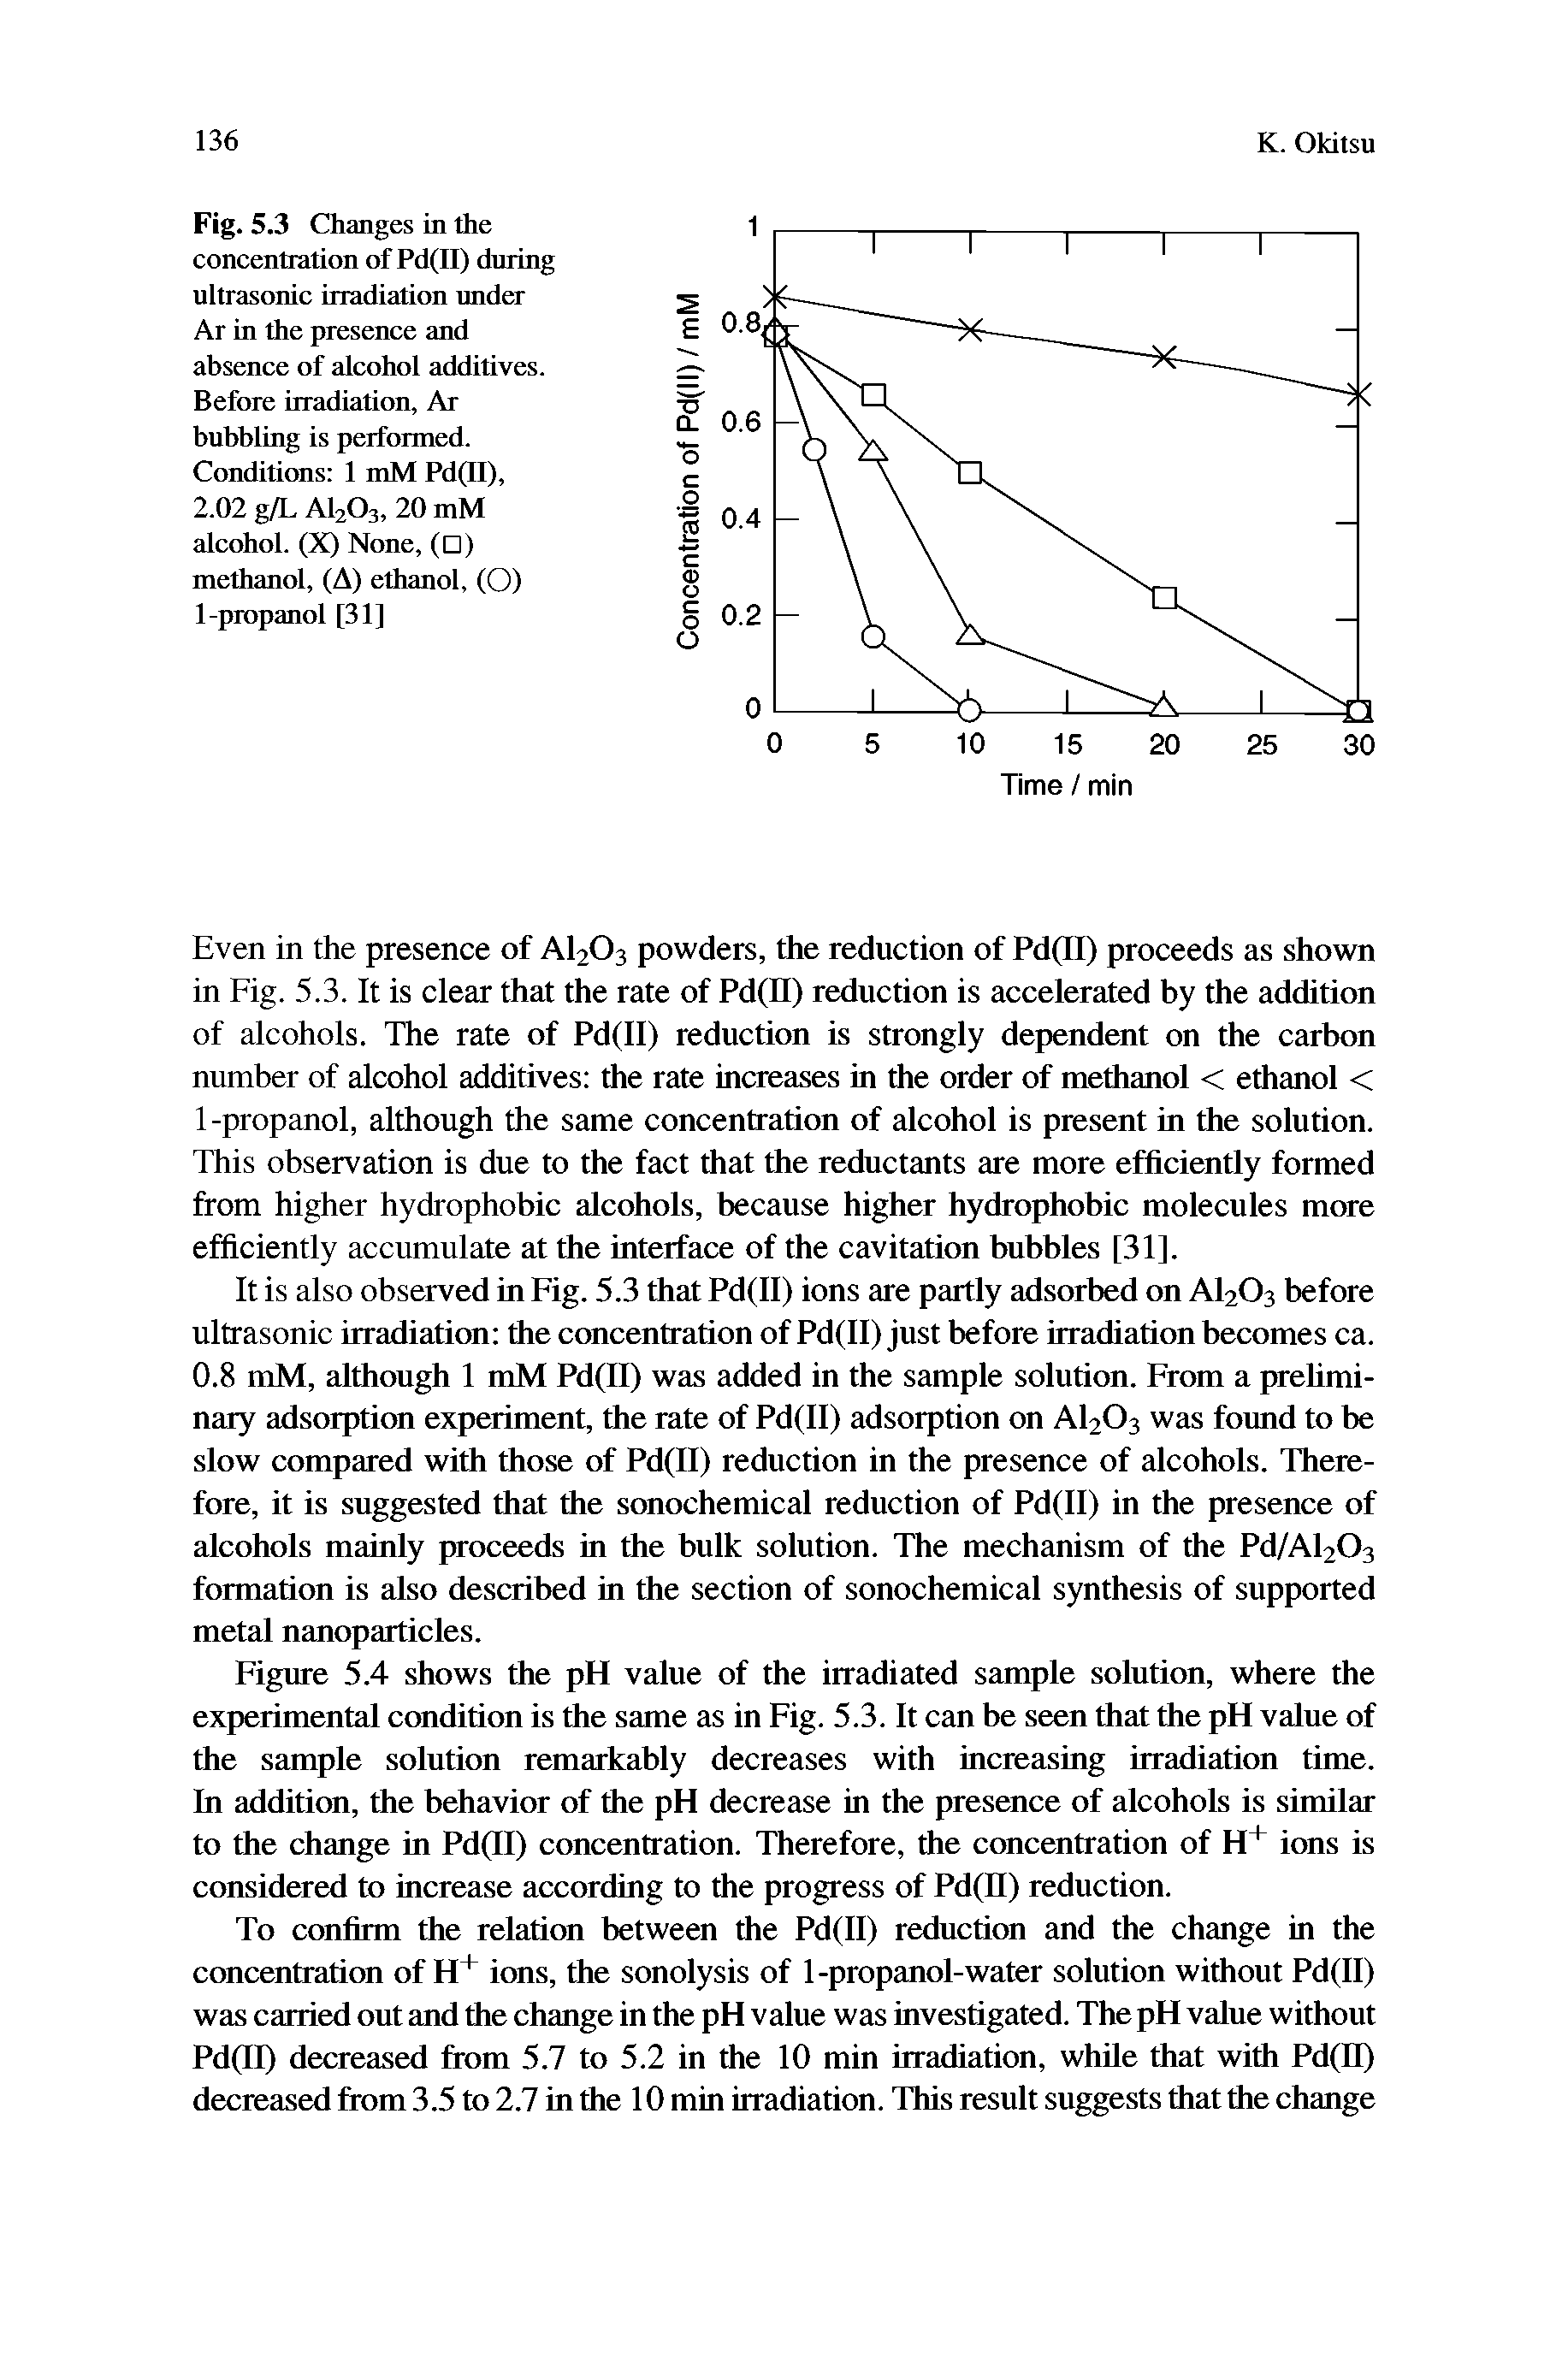 Fig. 5.3 Changes in the concentration of Pd(II) during ultrasonic irradiation under Ar in the presence and absence of alcohol additives. Before irradiation, Ar bubbling is performed. Conditions 1 mM Pd(II), 2.02 g/L A1203, 20 mM alcohol. (X) None, ( ) methanol, (A) ethanol, (O)...